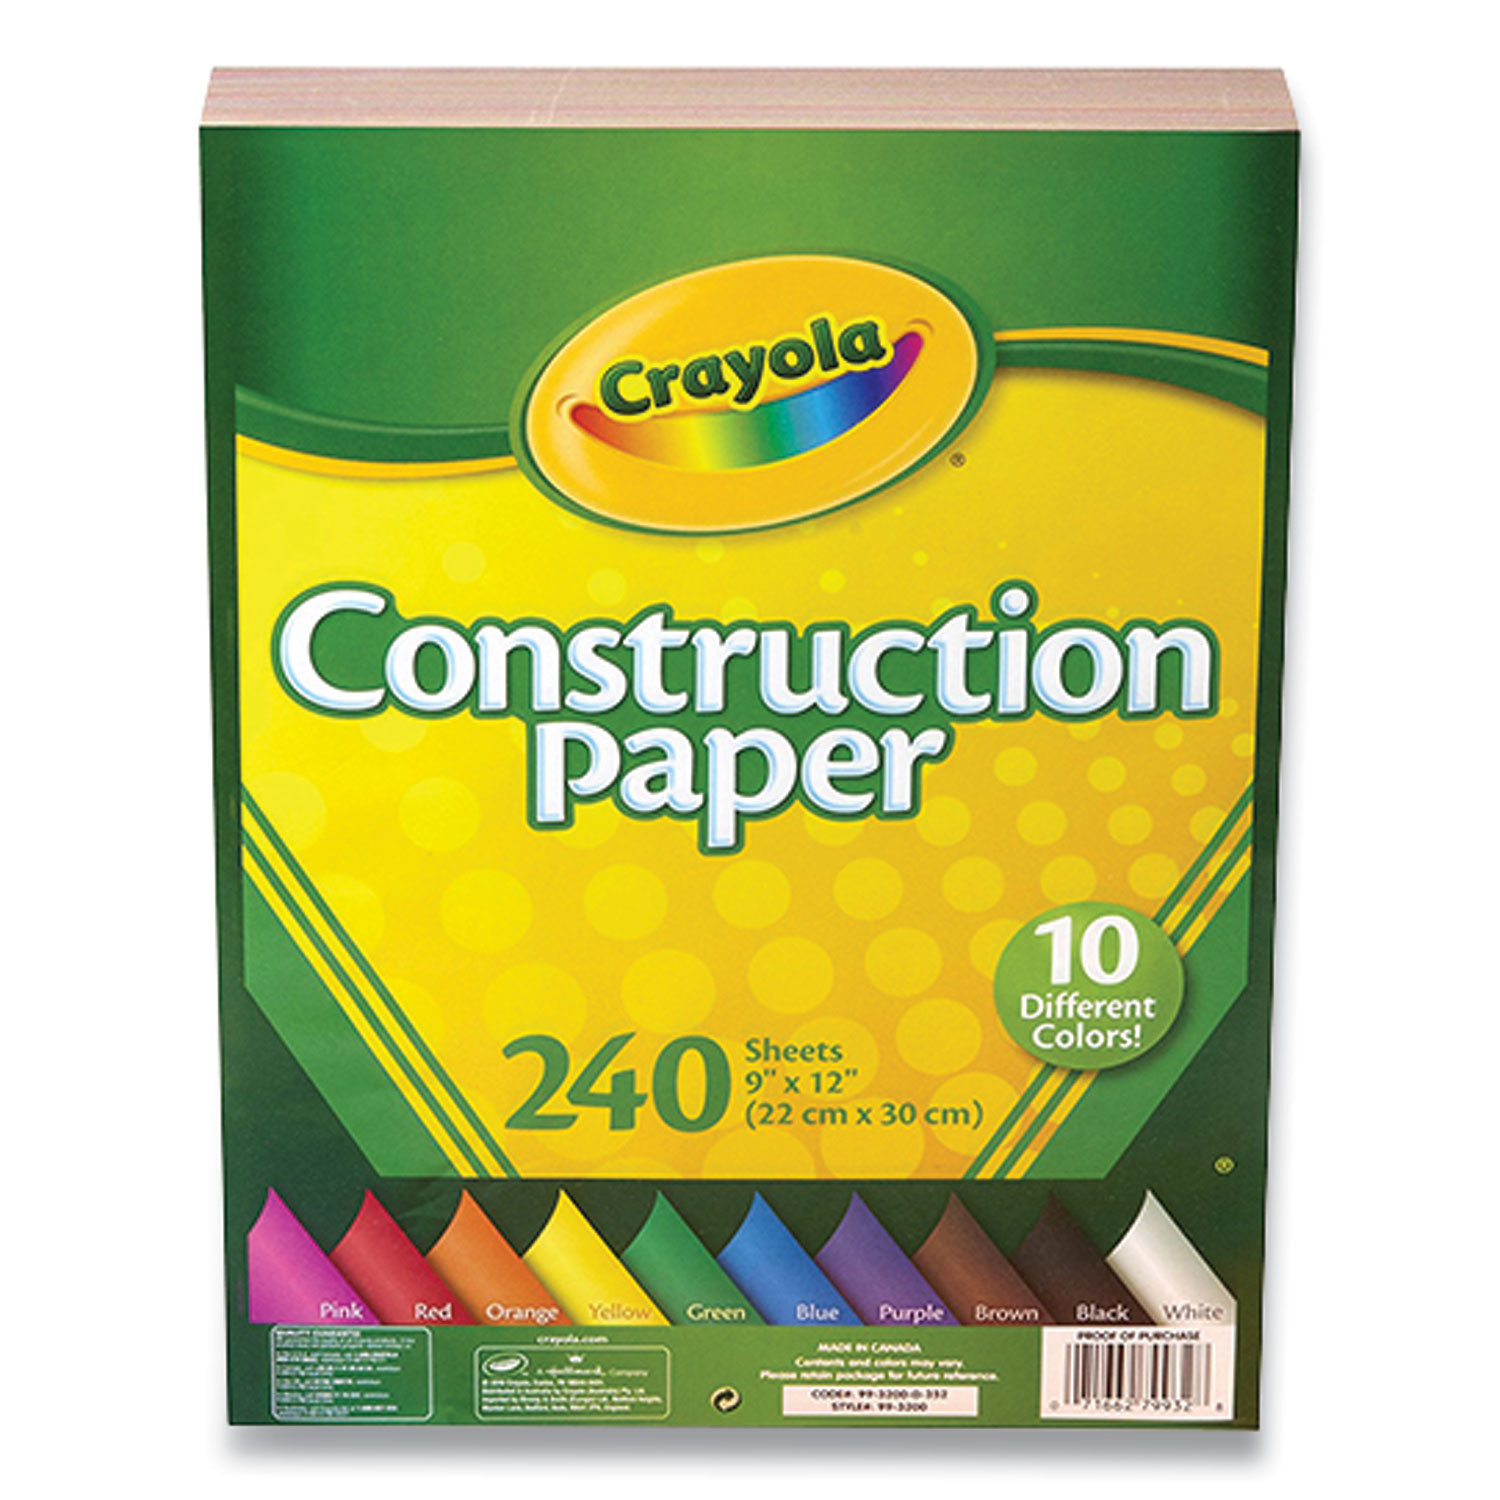 Crayola® Construction Paper, 9 x 12, Assorted Colors, 240 Sheets/Pack, 2 Packs/Box